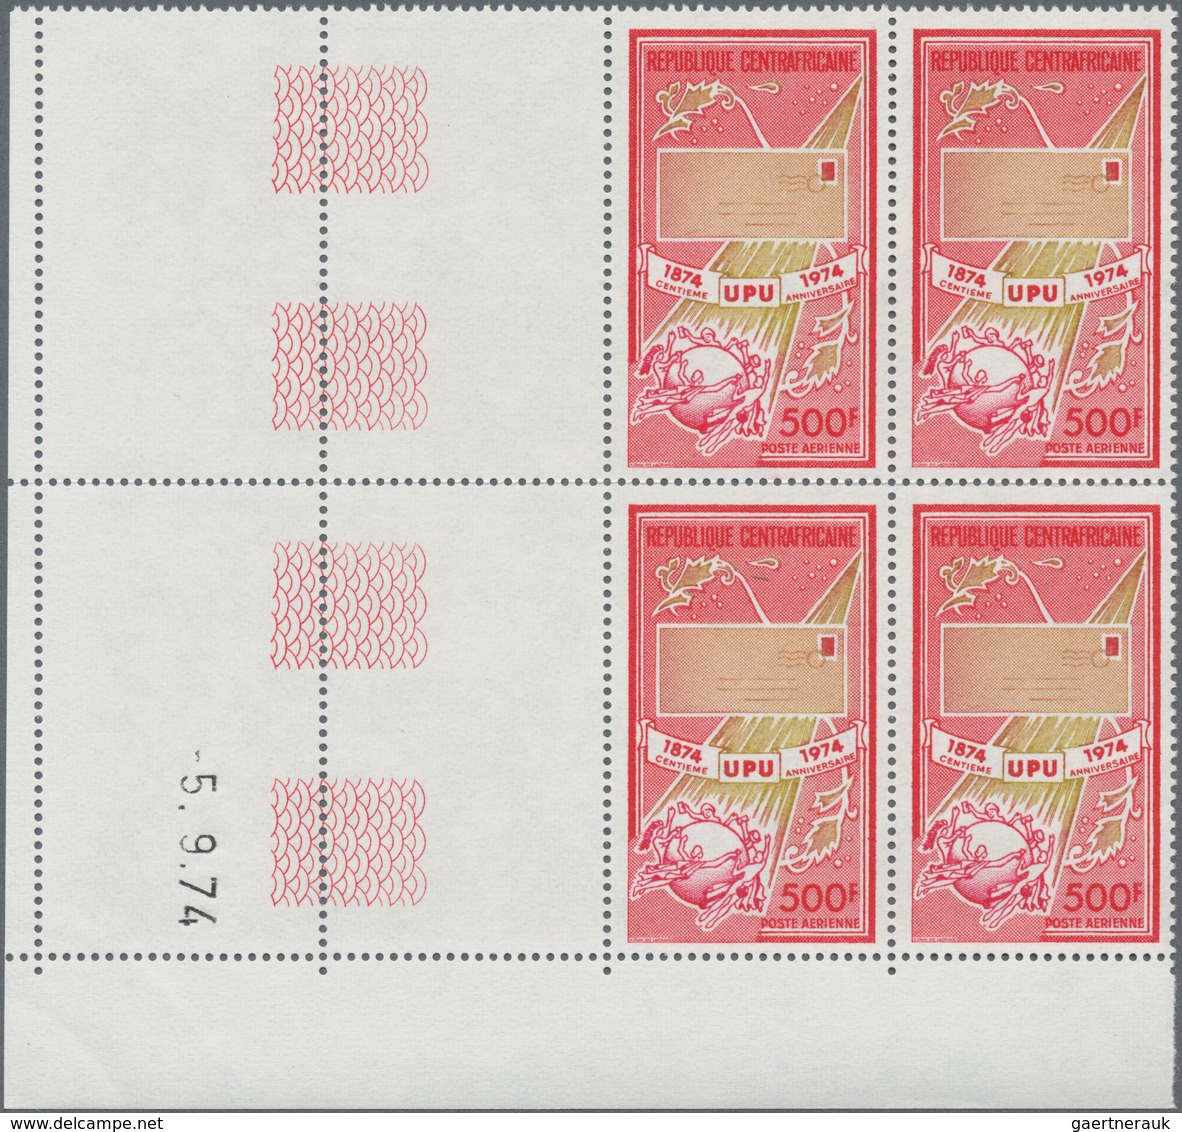 Zentralafrikanische Republik: 1974, 100 Years Of World Postal Union (UPU) 500fr. Showing Letter And - Repubblica Centroafricana